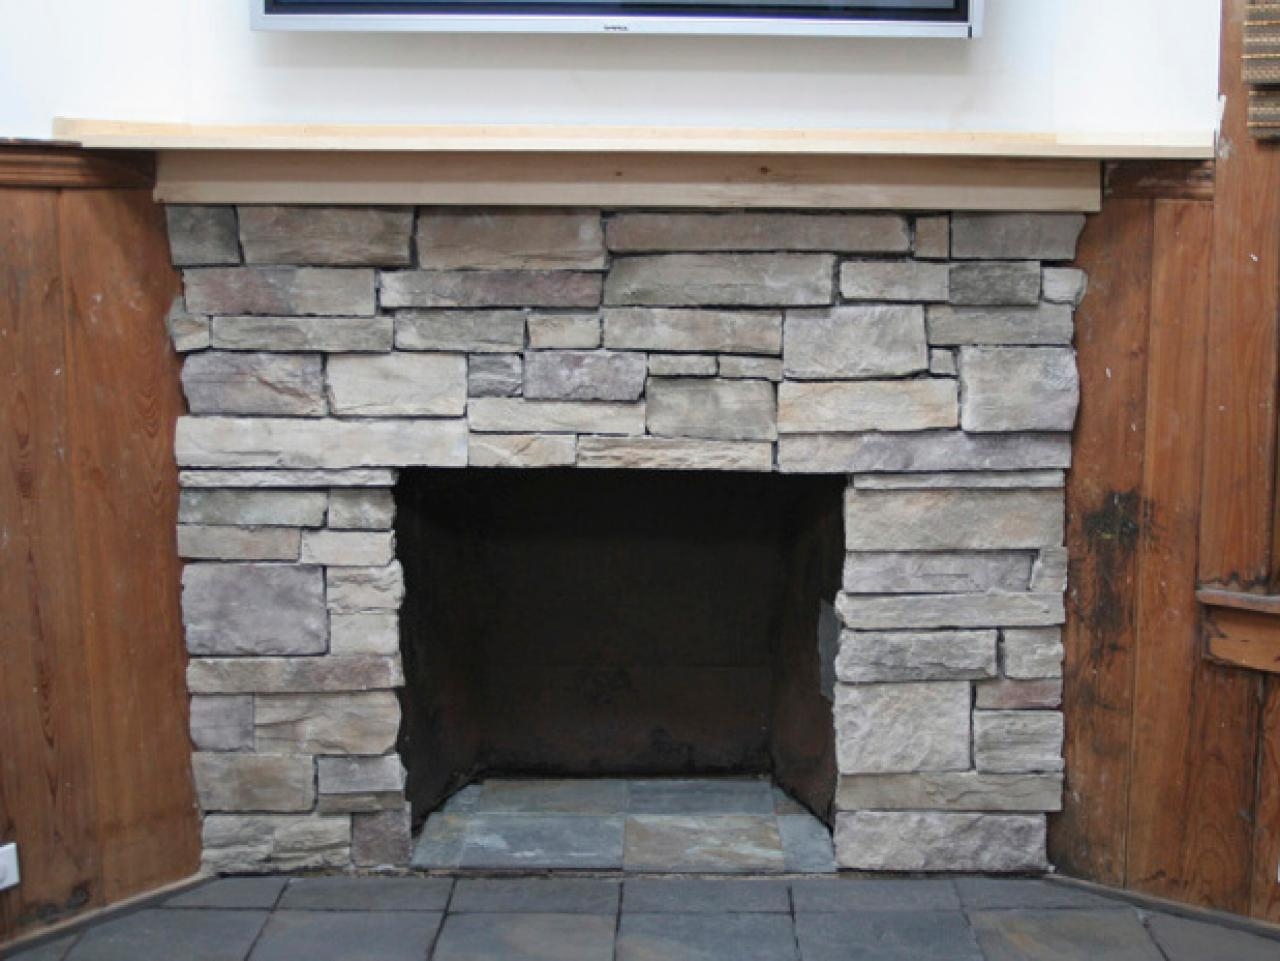 Fireplace Grate Blower Awesome Brick Fireplace Cover Up Charming Fireplace